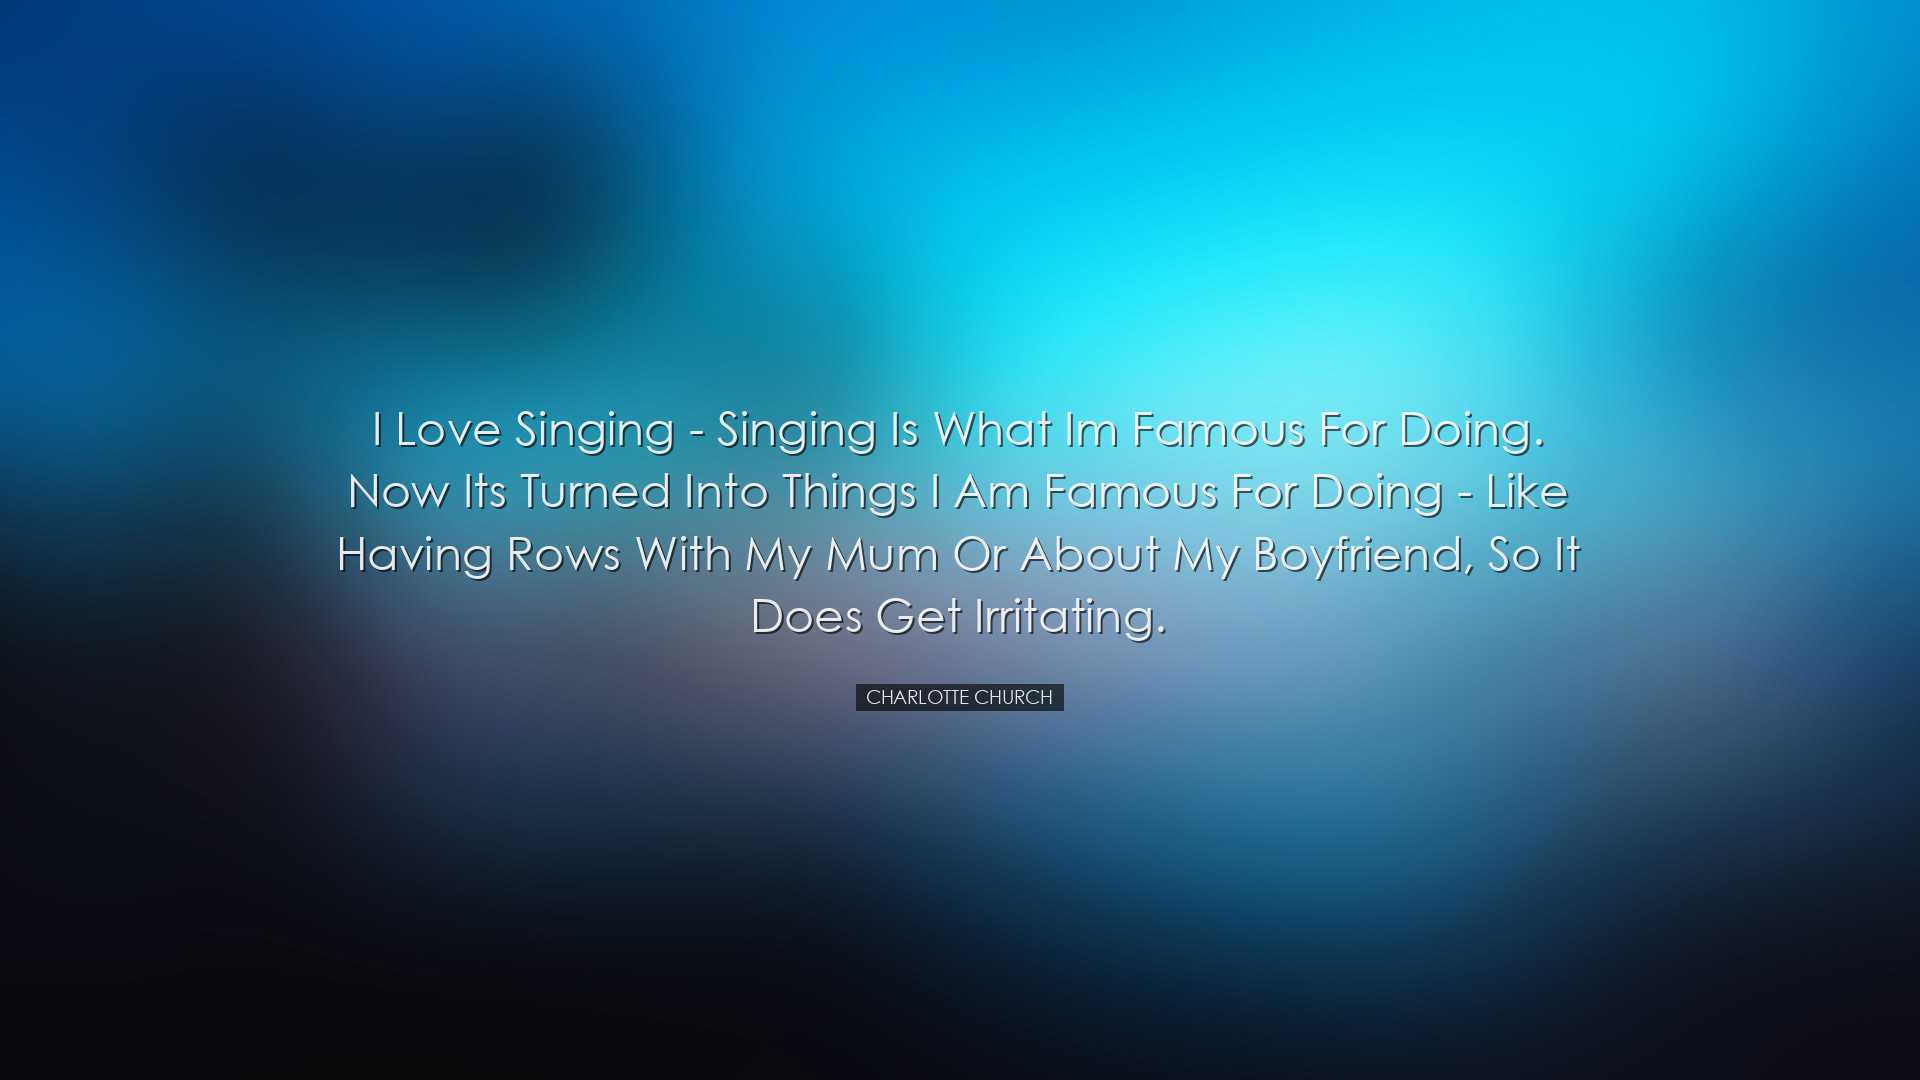 I love singing - singing is what Im famous for doing. Now its turn